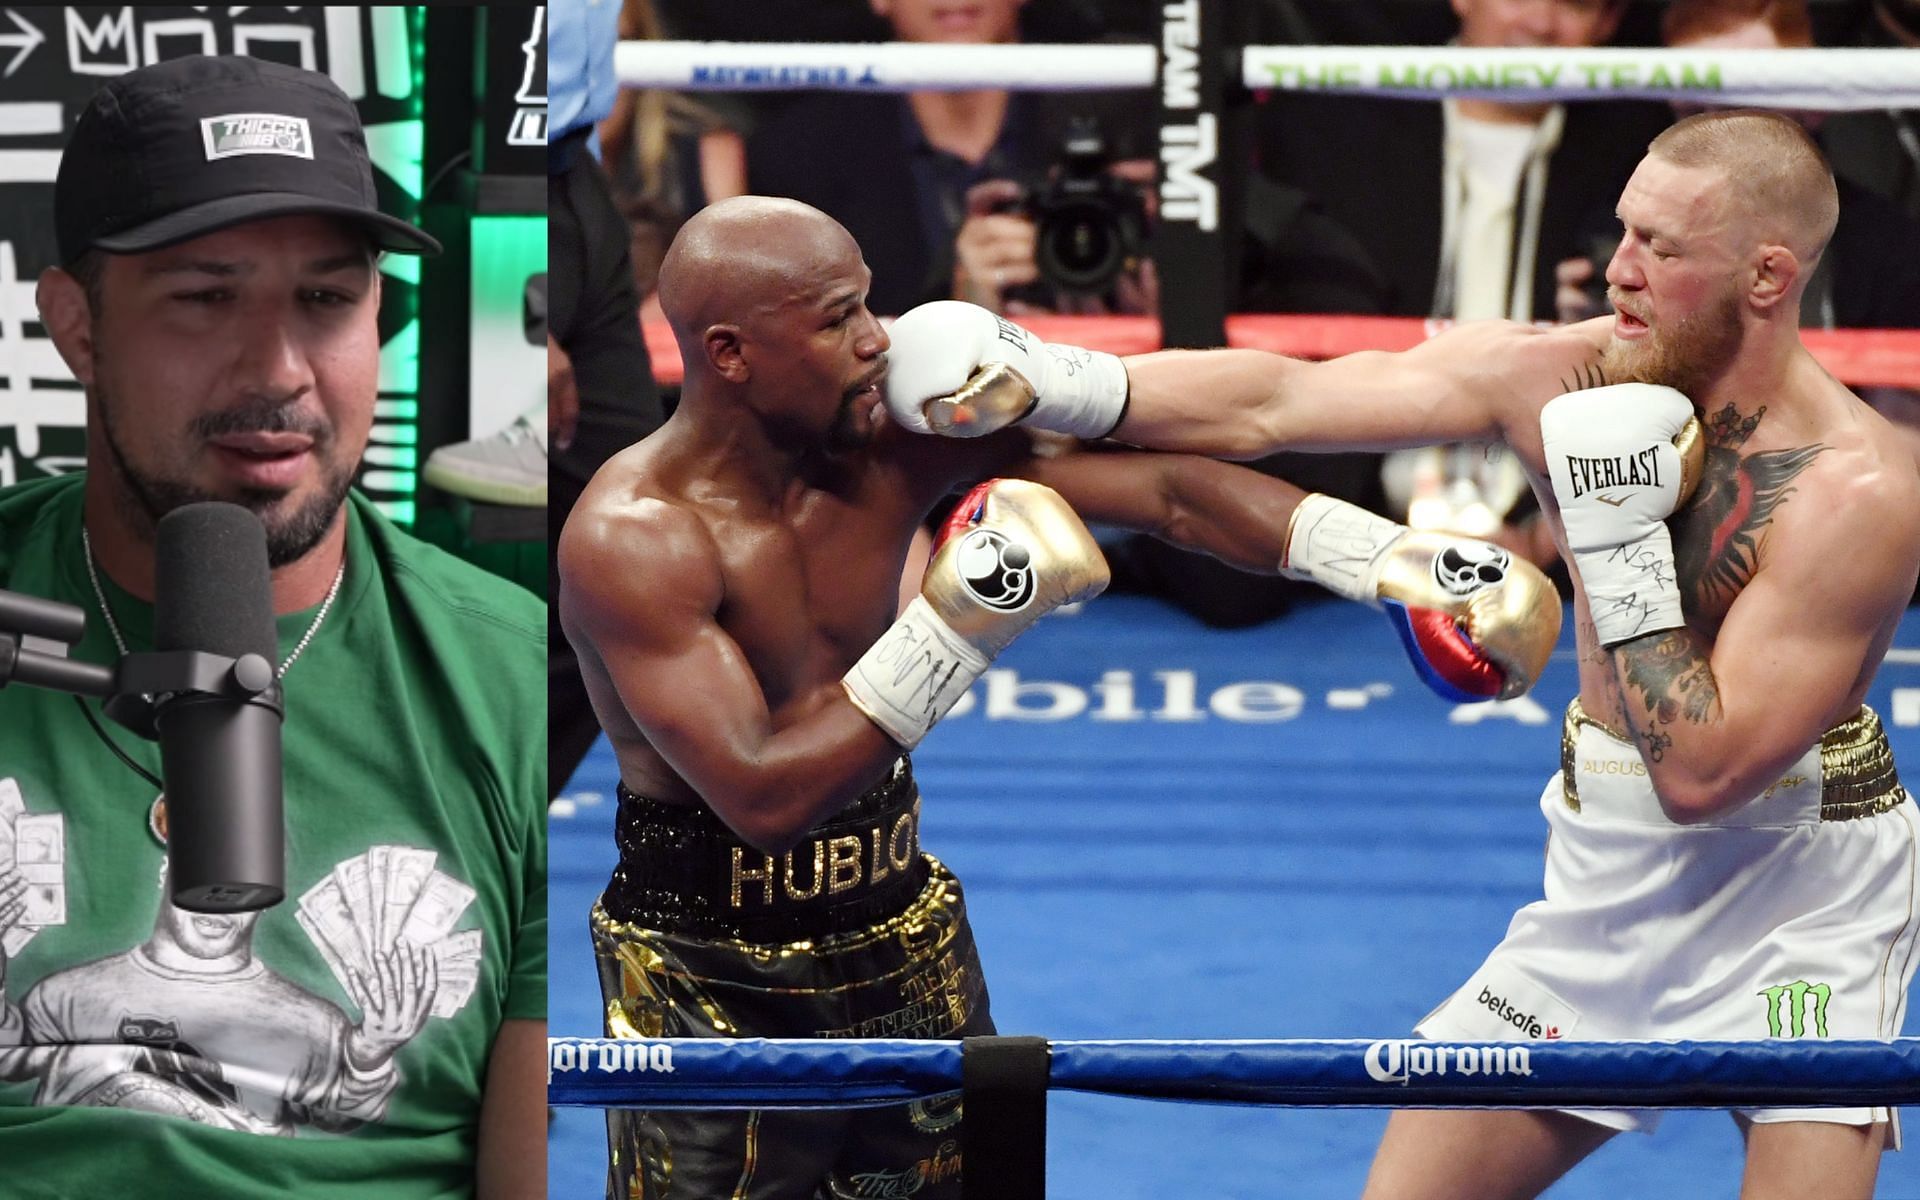 Brendan Schaub (left) and Floyd Mayweather vs. Conor McGregor (right). [Images courtesy: left image from YouTube Thiccc Boy and right image from Getty Images]